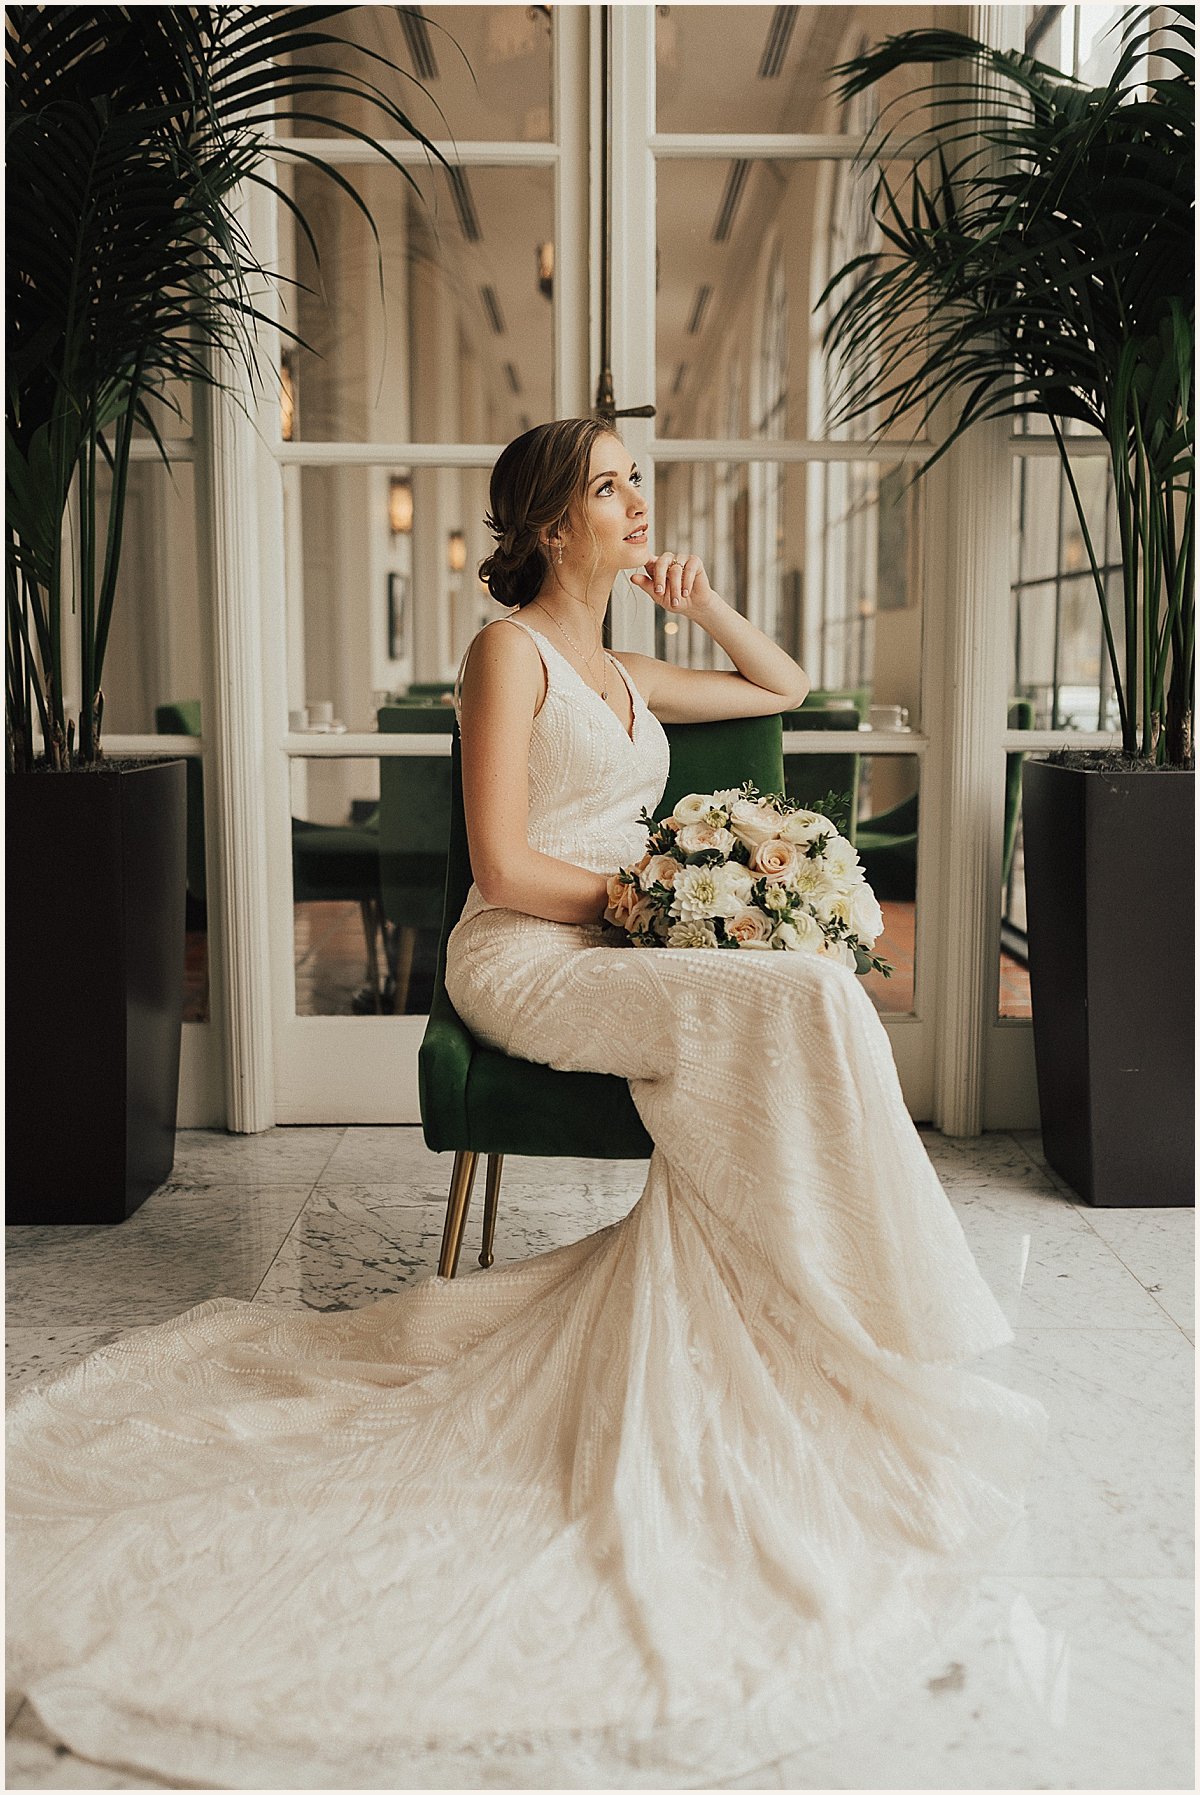 Bride on wedding day St. Anthony Hotel rooftop portraits | Lauren Parr Photography